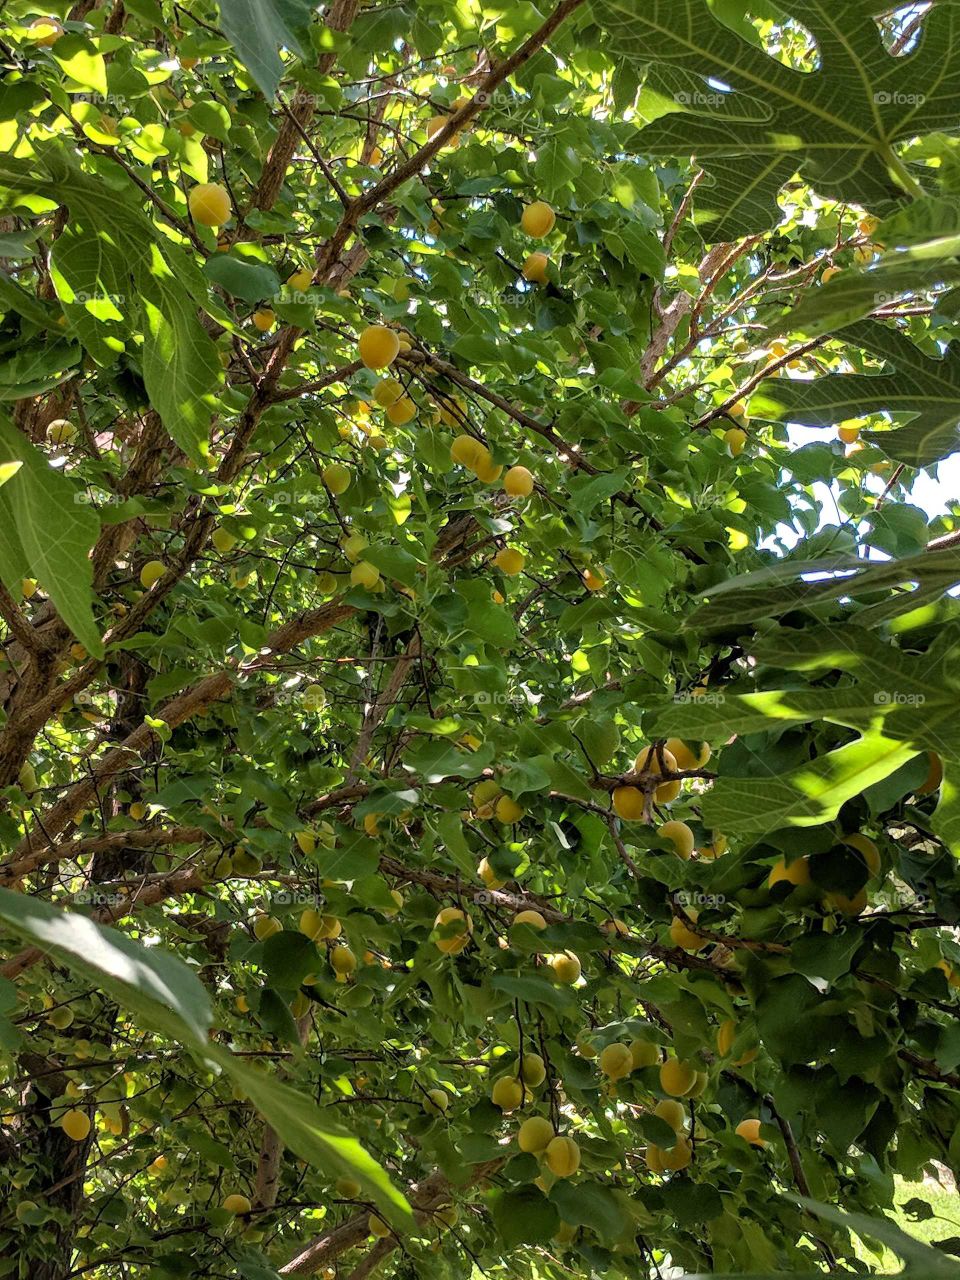 Plump, Juicy Orange Apricots Growing on a Tree with Green Leaves and the Sun Peeking Through the Leaves in Morocco